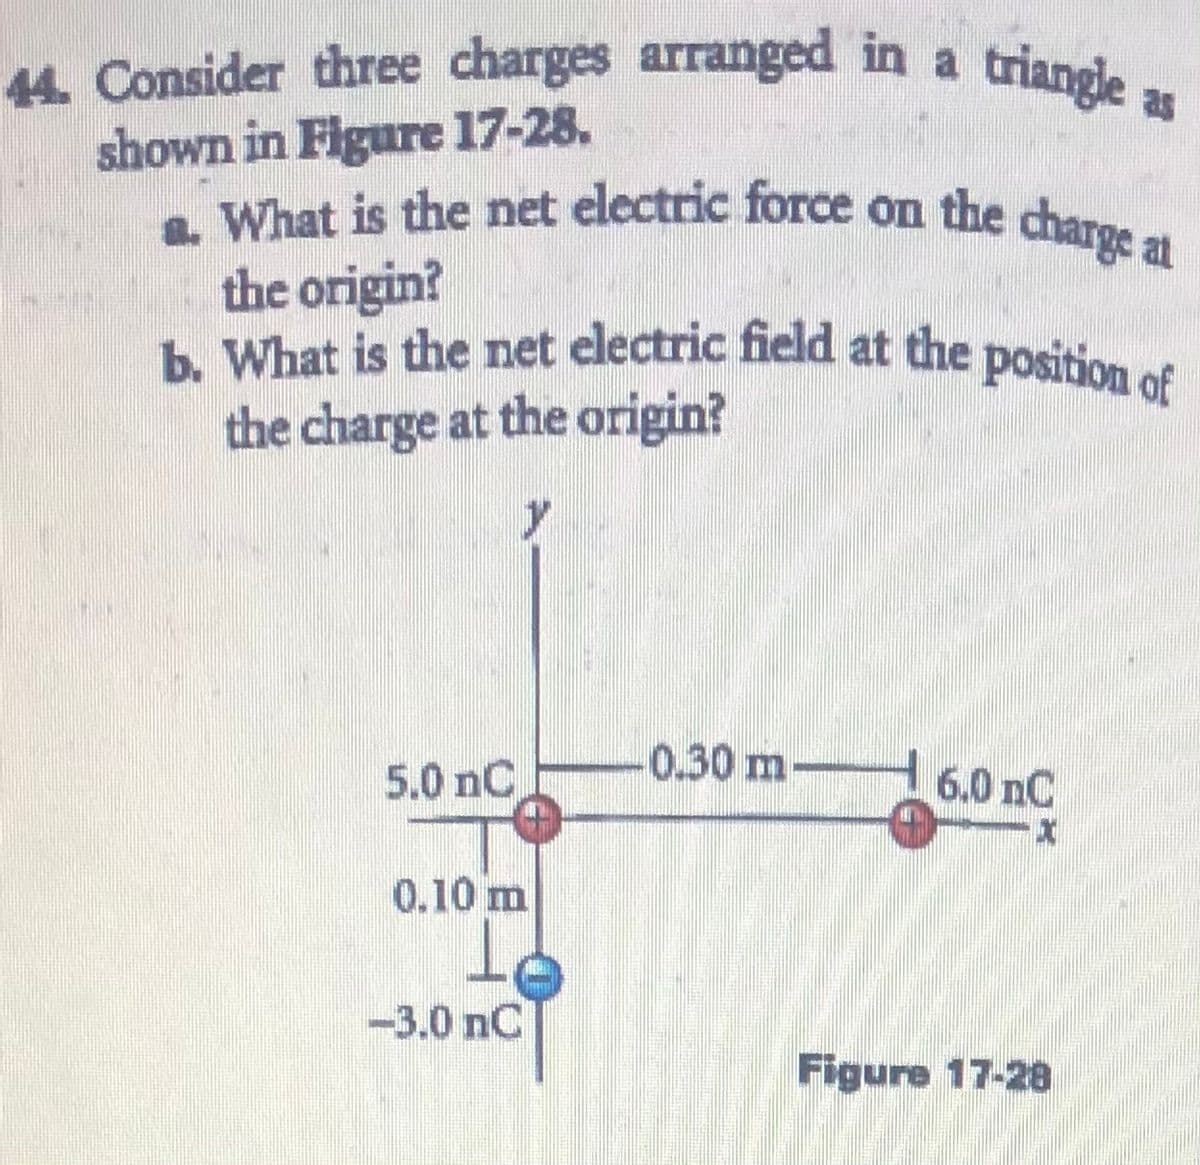 b. What is the net electric field at the position of
a. What is the net electric force on the charge at
triangle as
44 Consider three charges arranged in a
shown in Figure 17-28.
- What is the net electric force on the chare
the origin?
the charge at the origin?
5.0 nC
0.30 m
6.0 nC
0.10 m
-3.0 nC
Figure 17-28
